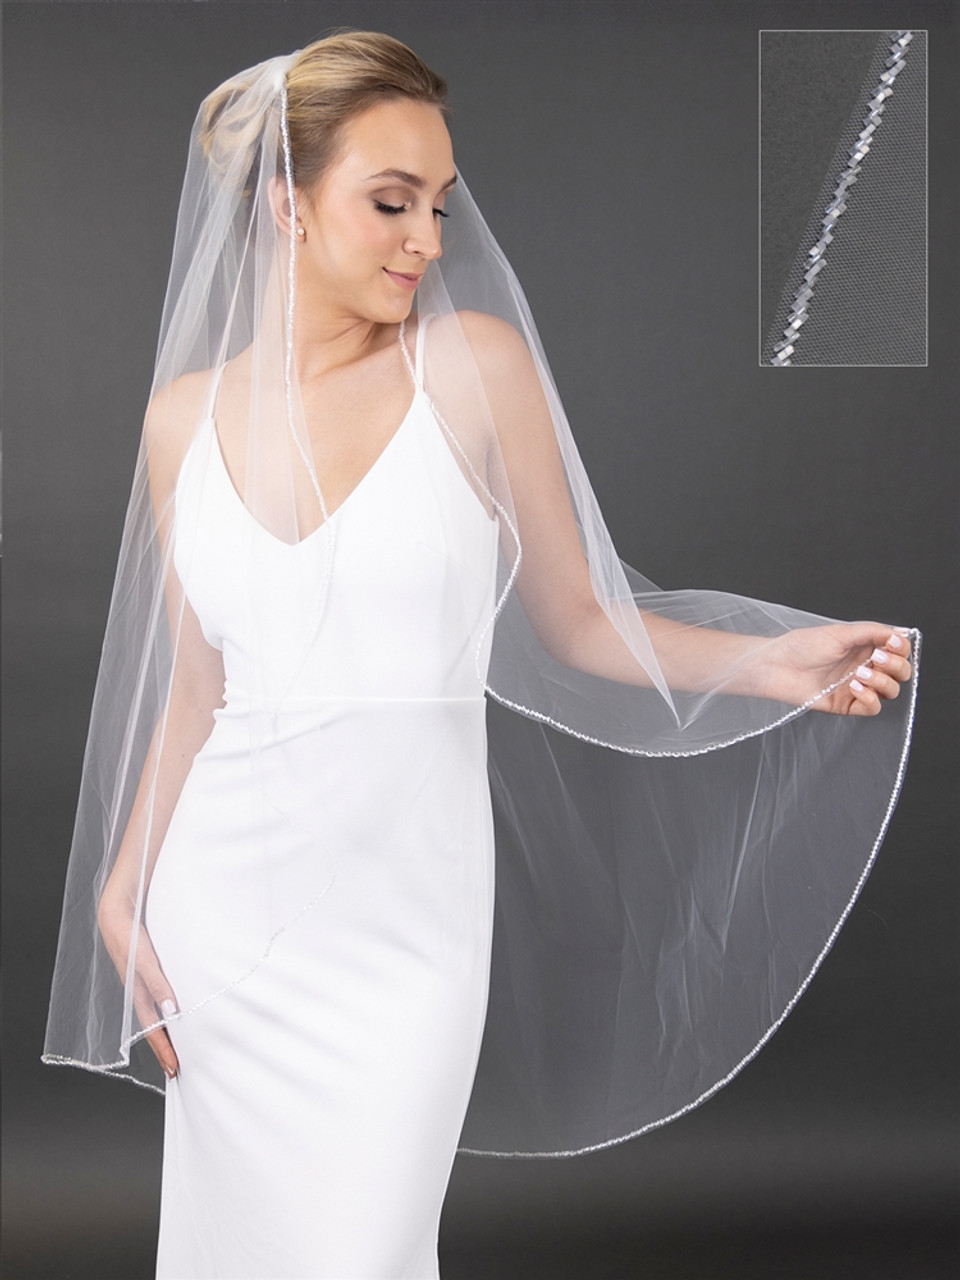 Mariell Knee Length Exquisite Beaded Ivory Wedding Veil with Opaque White Satin Bugle Beads 4676V-I-48 - 48" Inches Long